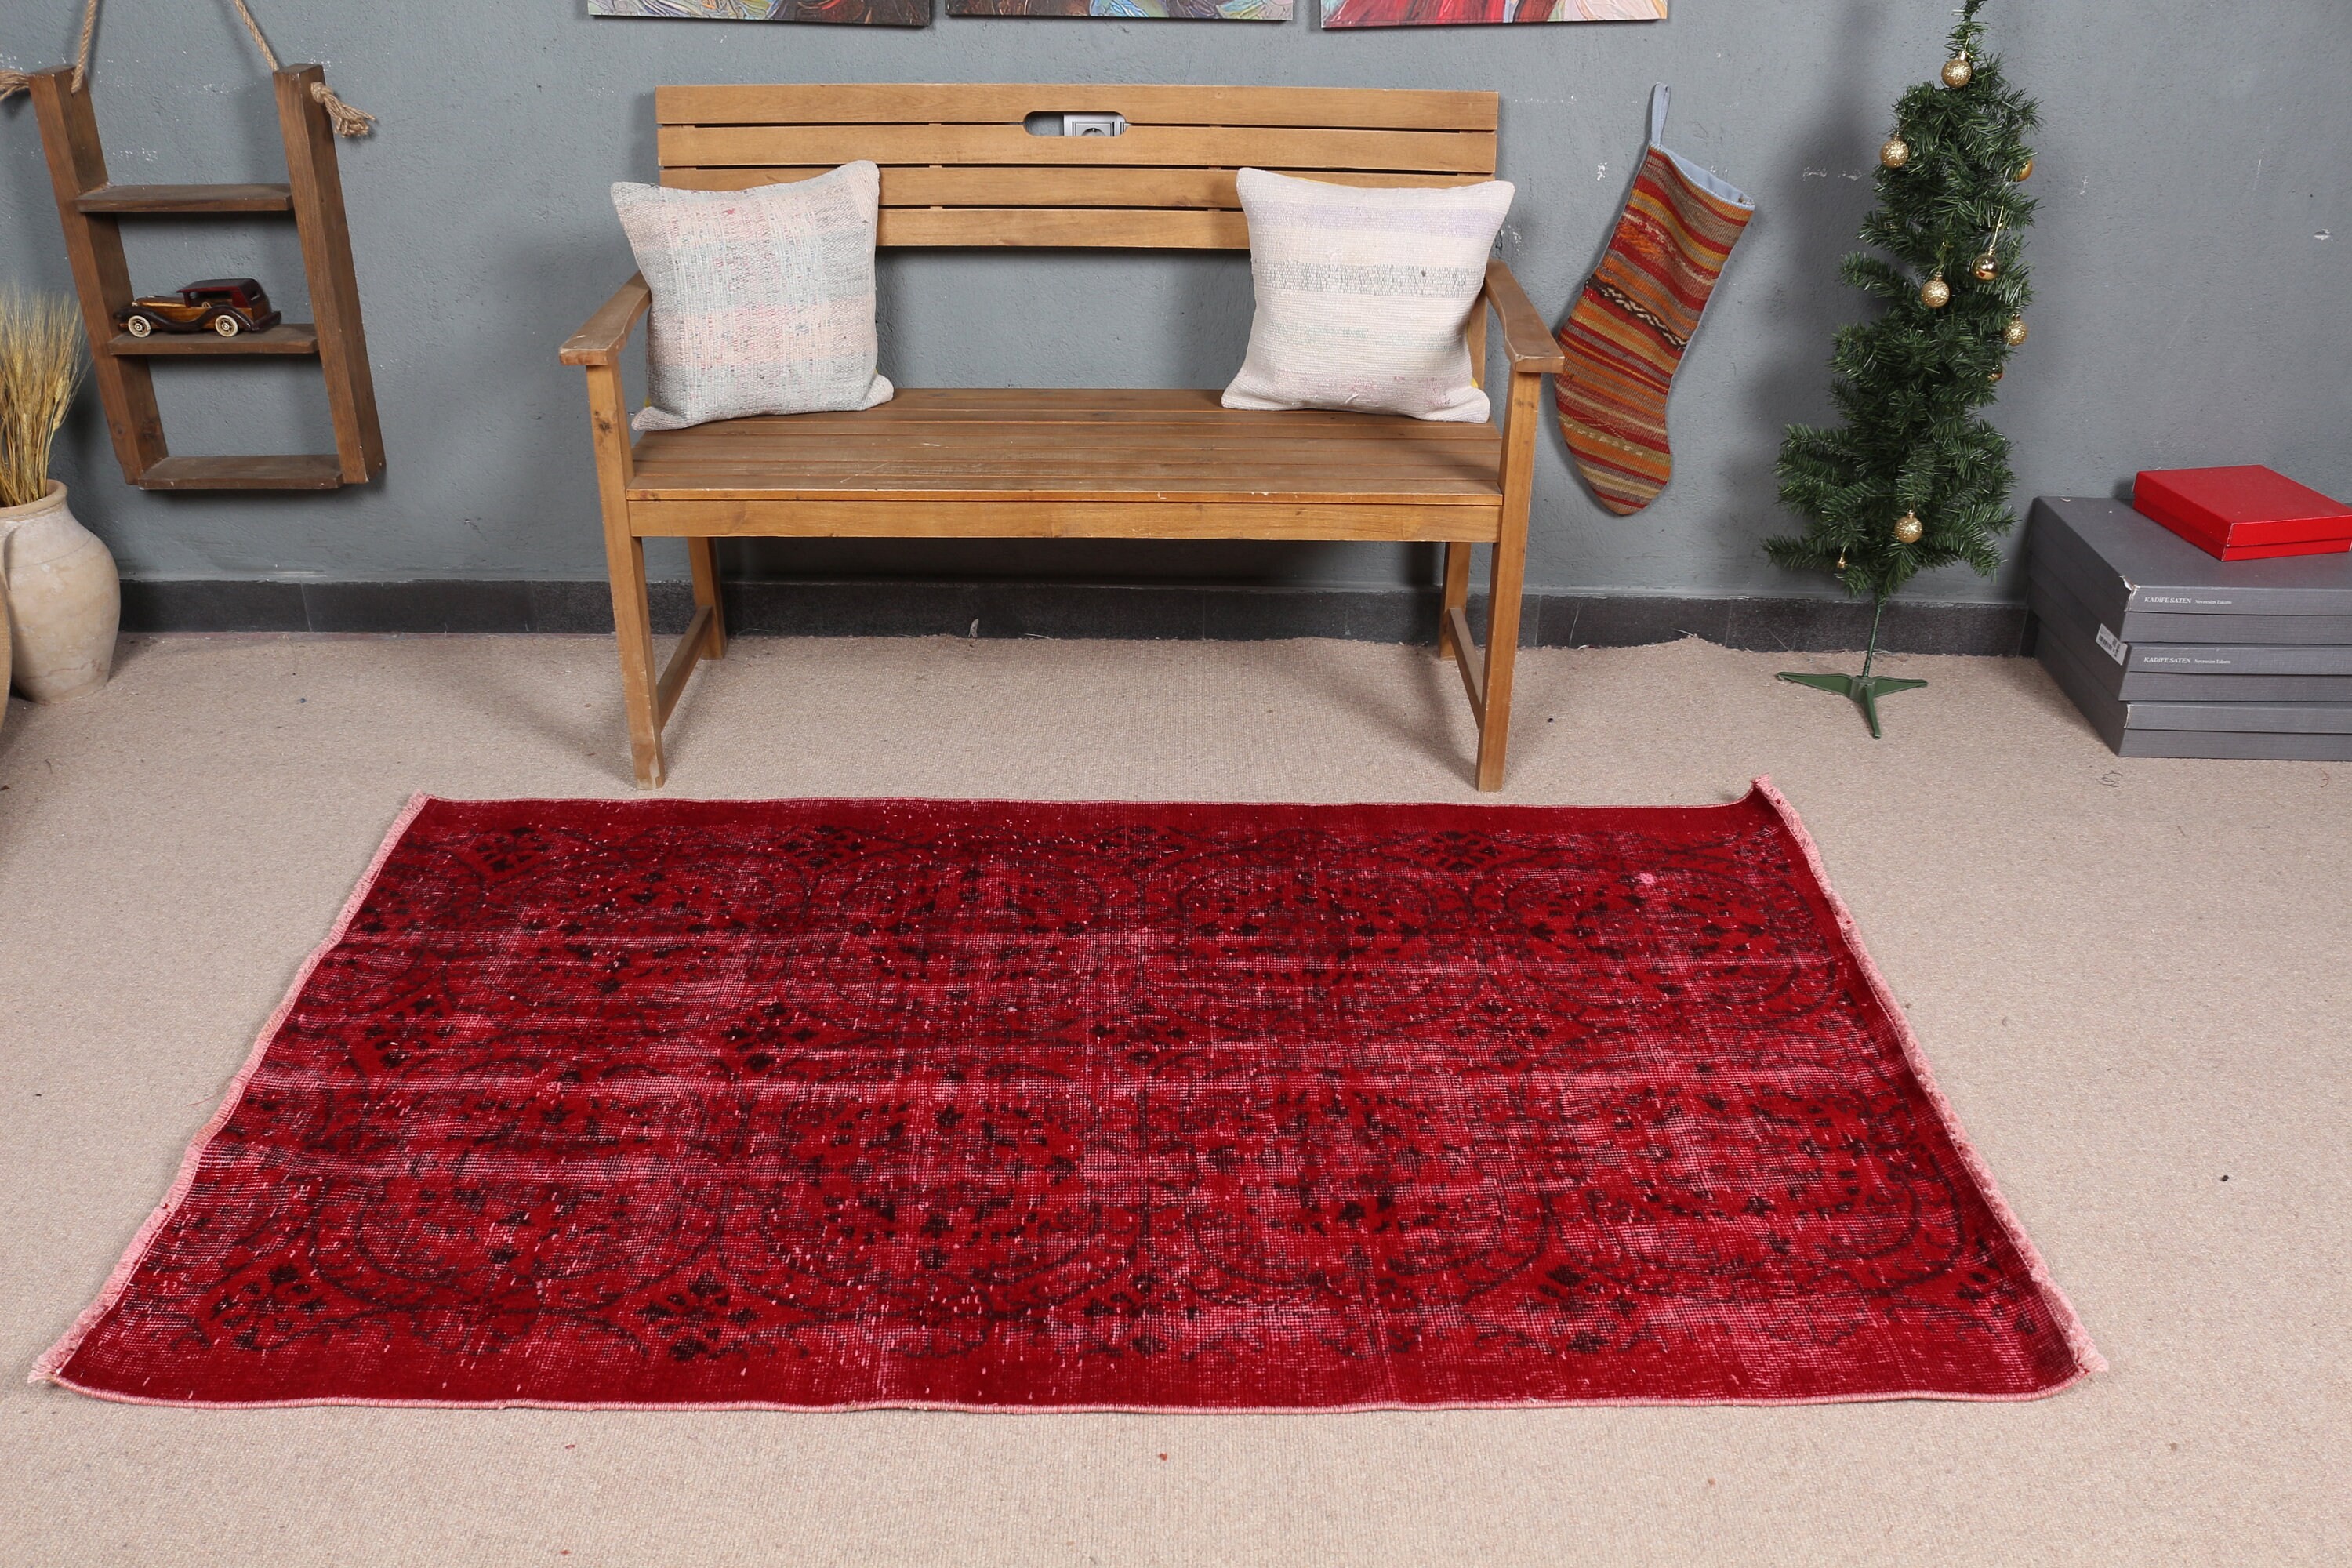 Rugs for Entry, 3.8x6.2 ft Accent Rug, Vintage Rug, Floor Rug, Red Cool Rug, Muted Rug, Entry Rug, Moroccan Rug, Kitchen Rugs, Turkish Rug